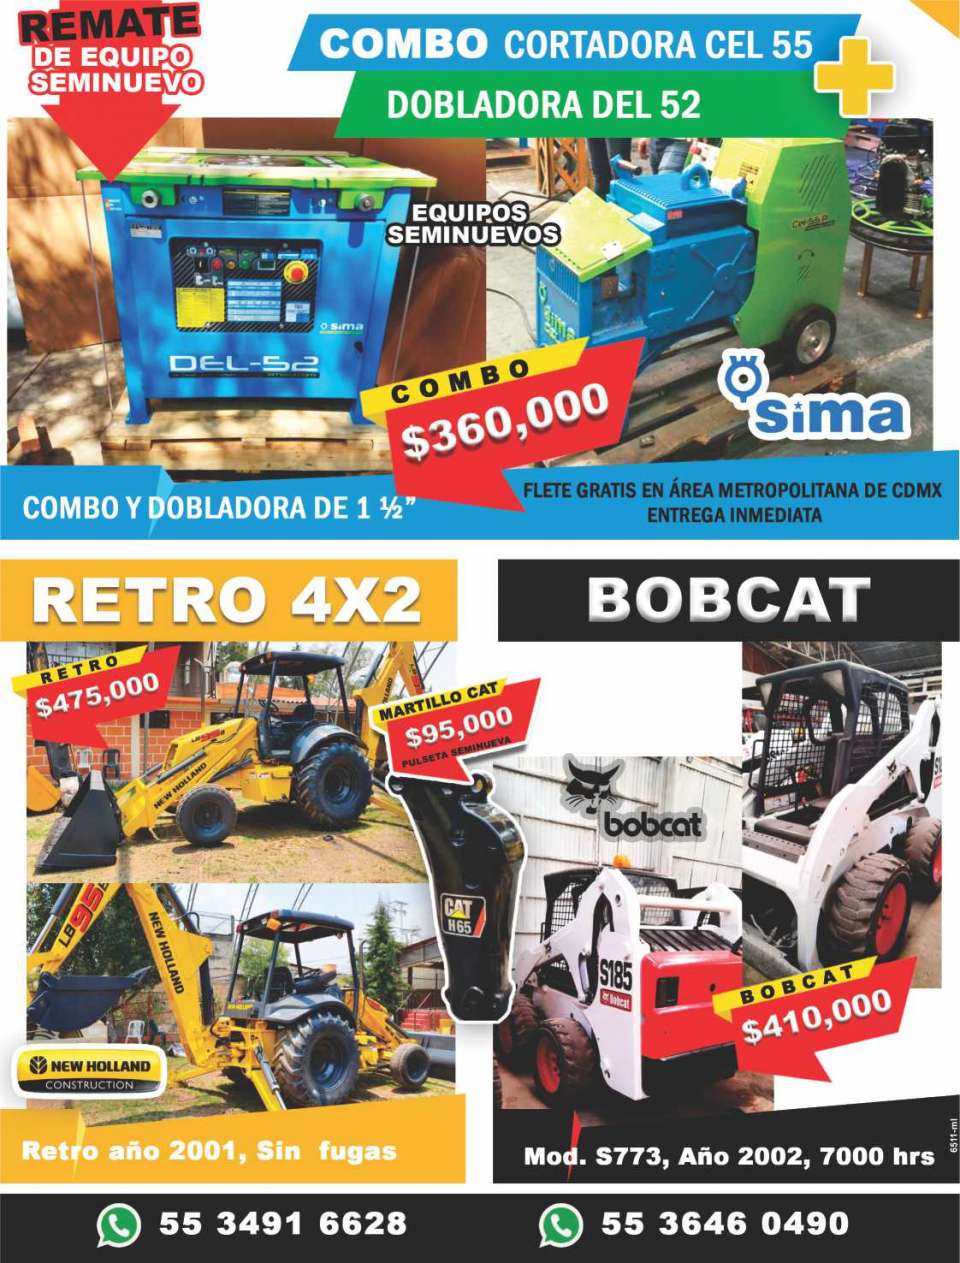 Semi-new equipment auction, free shipping in the metropolitan area of CdMx